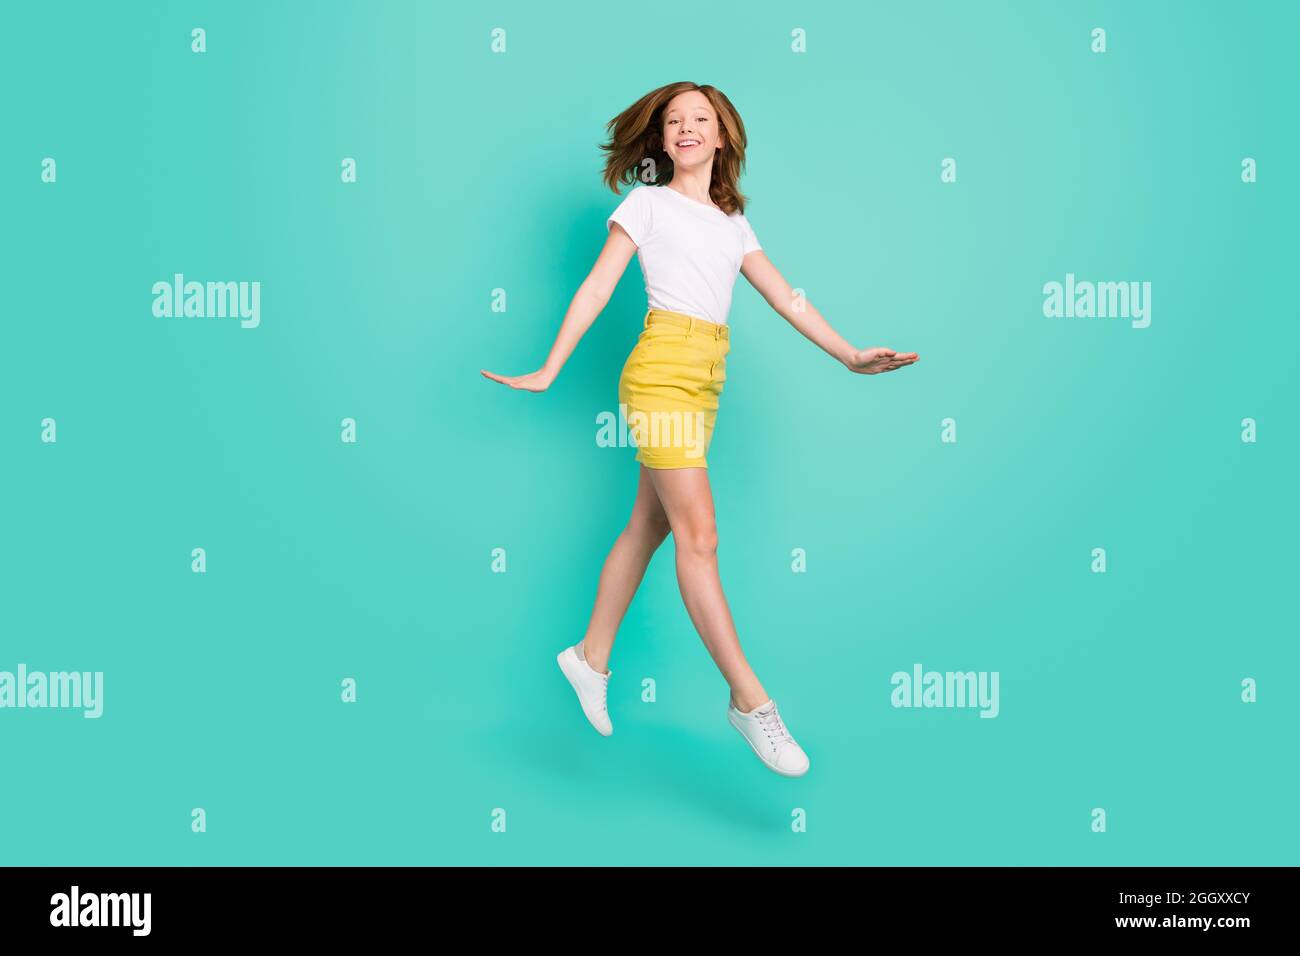 Full length body size photo smiling schoolgirl jumping up careless isolated vivid teal color background Stock Photo